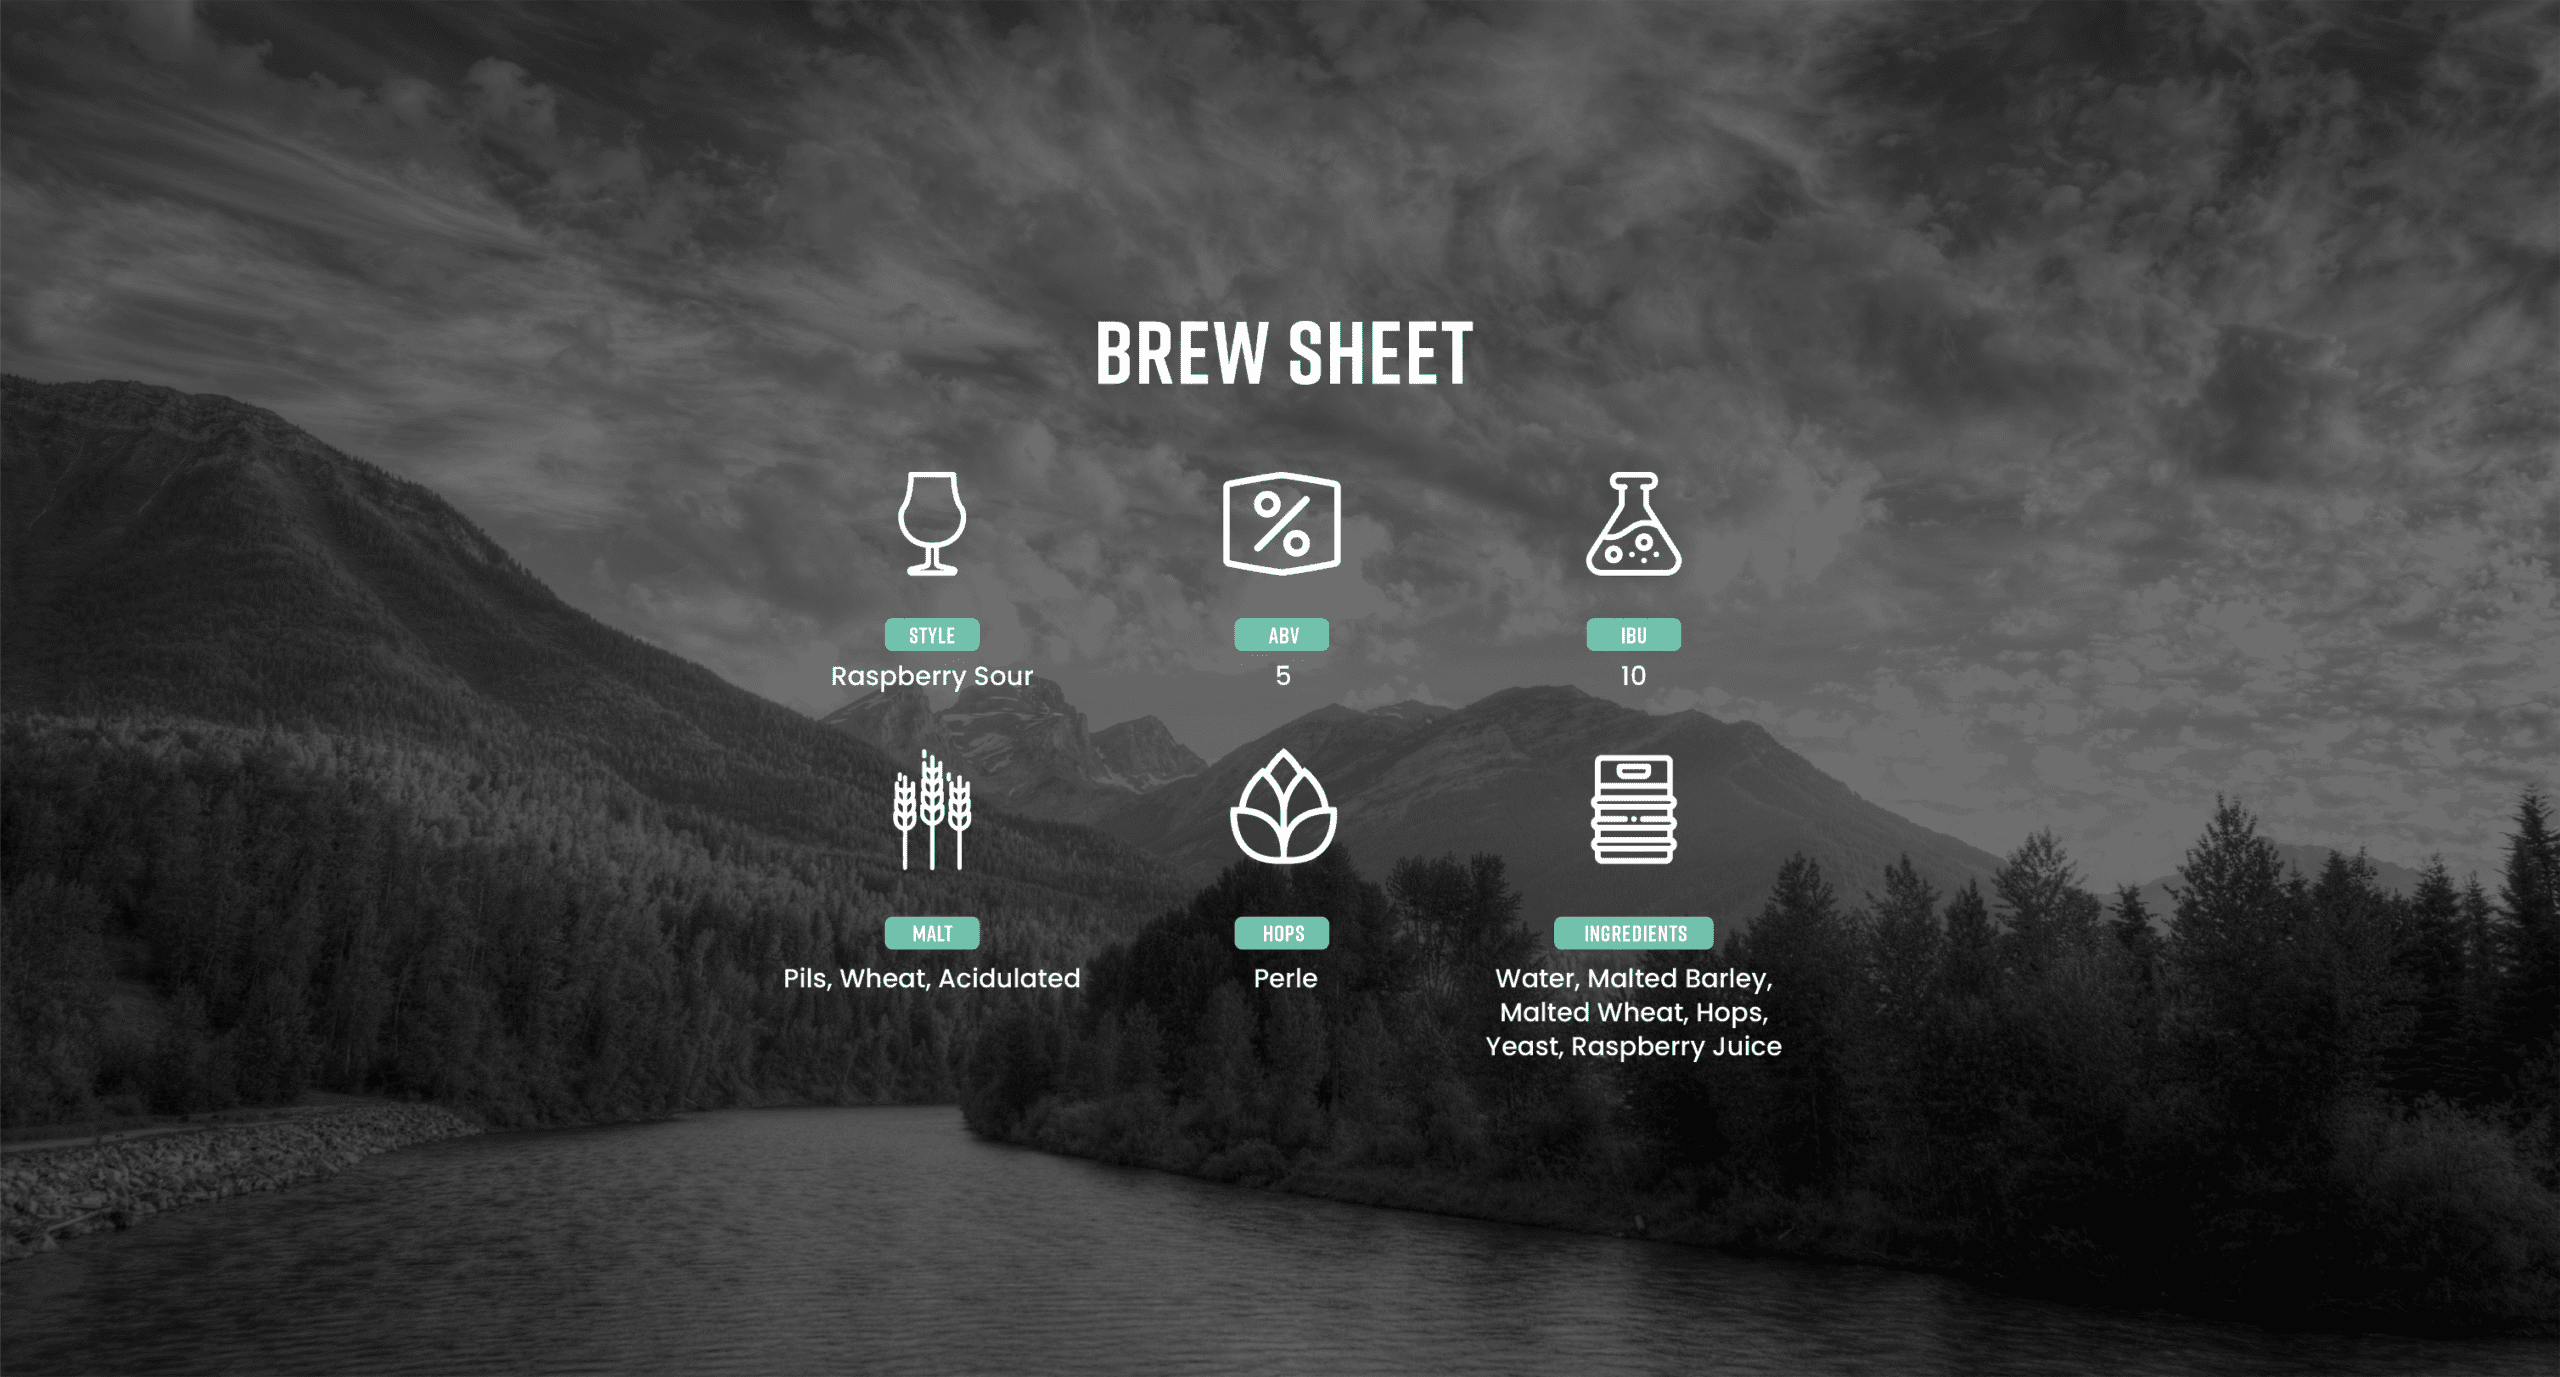 A brew sheet for Sundown Raspberry Sour summarizing the details of the beer.